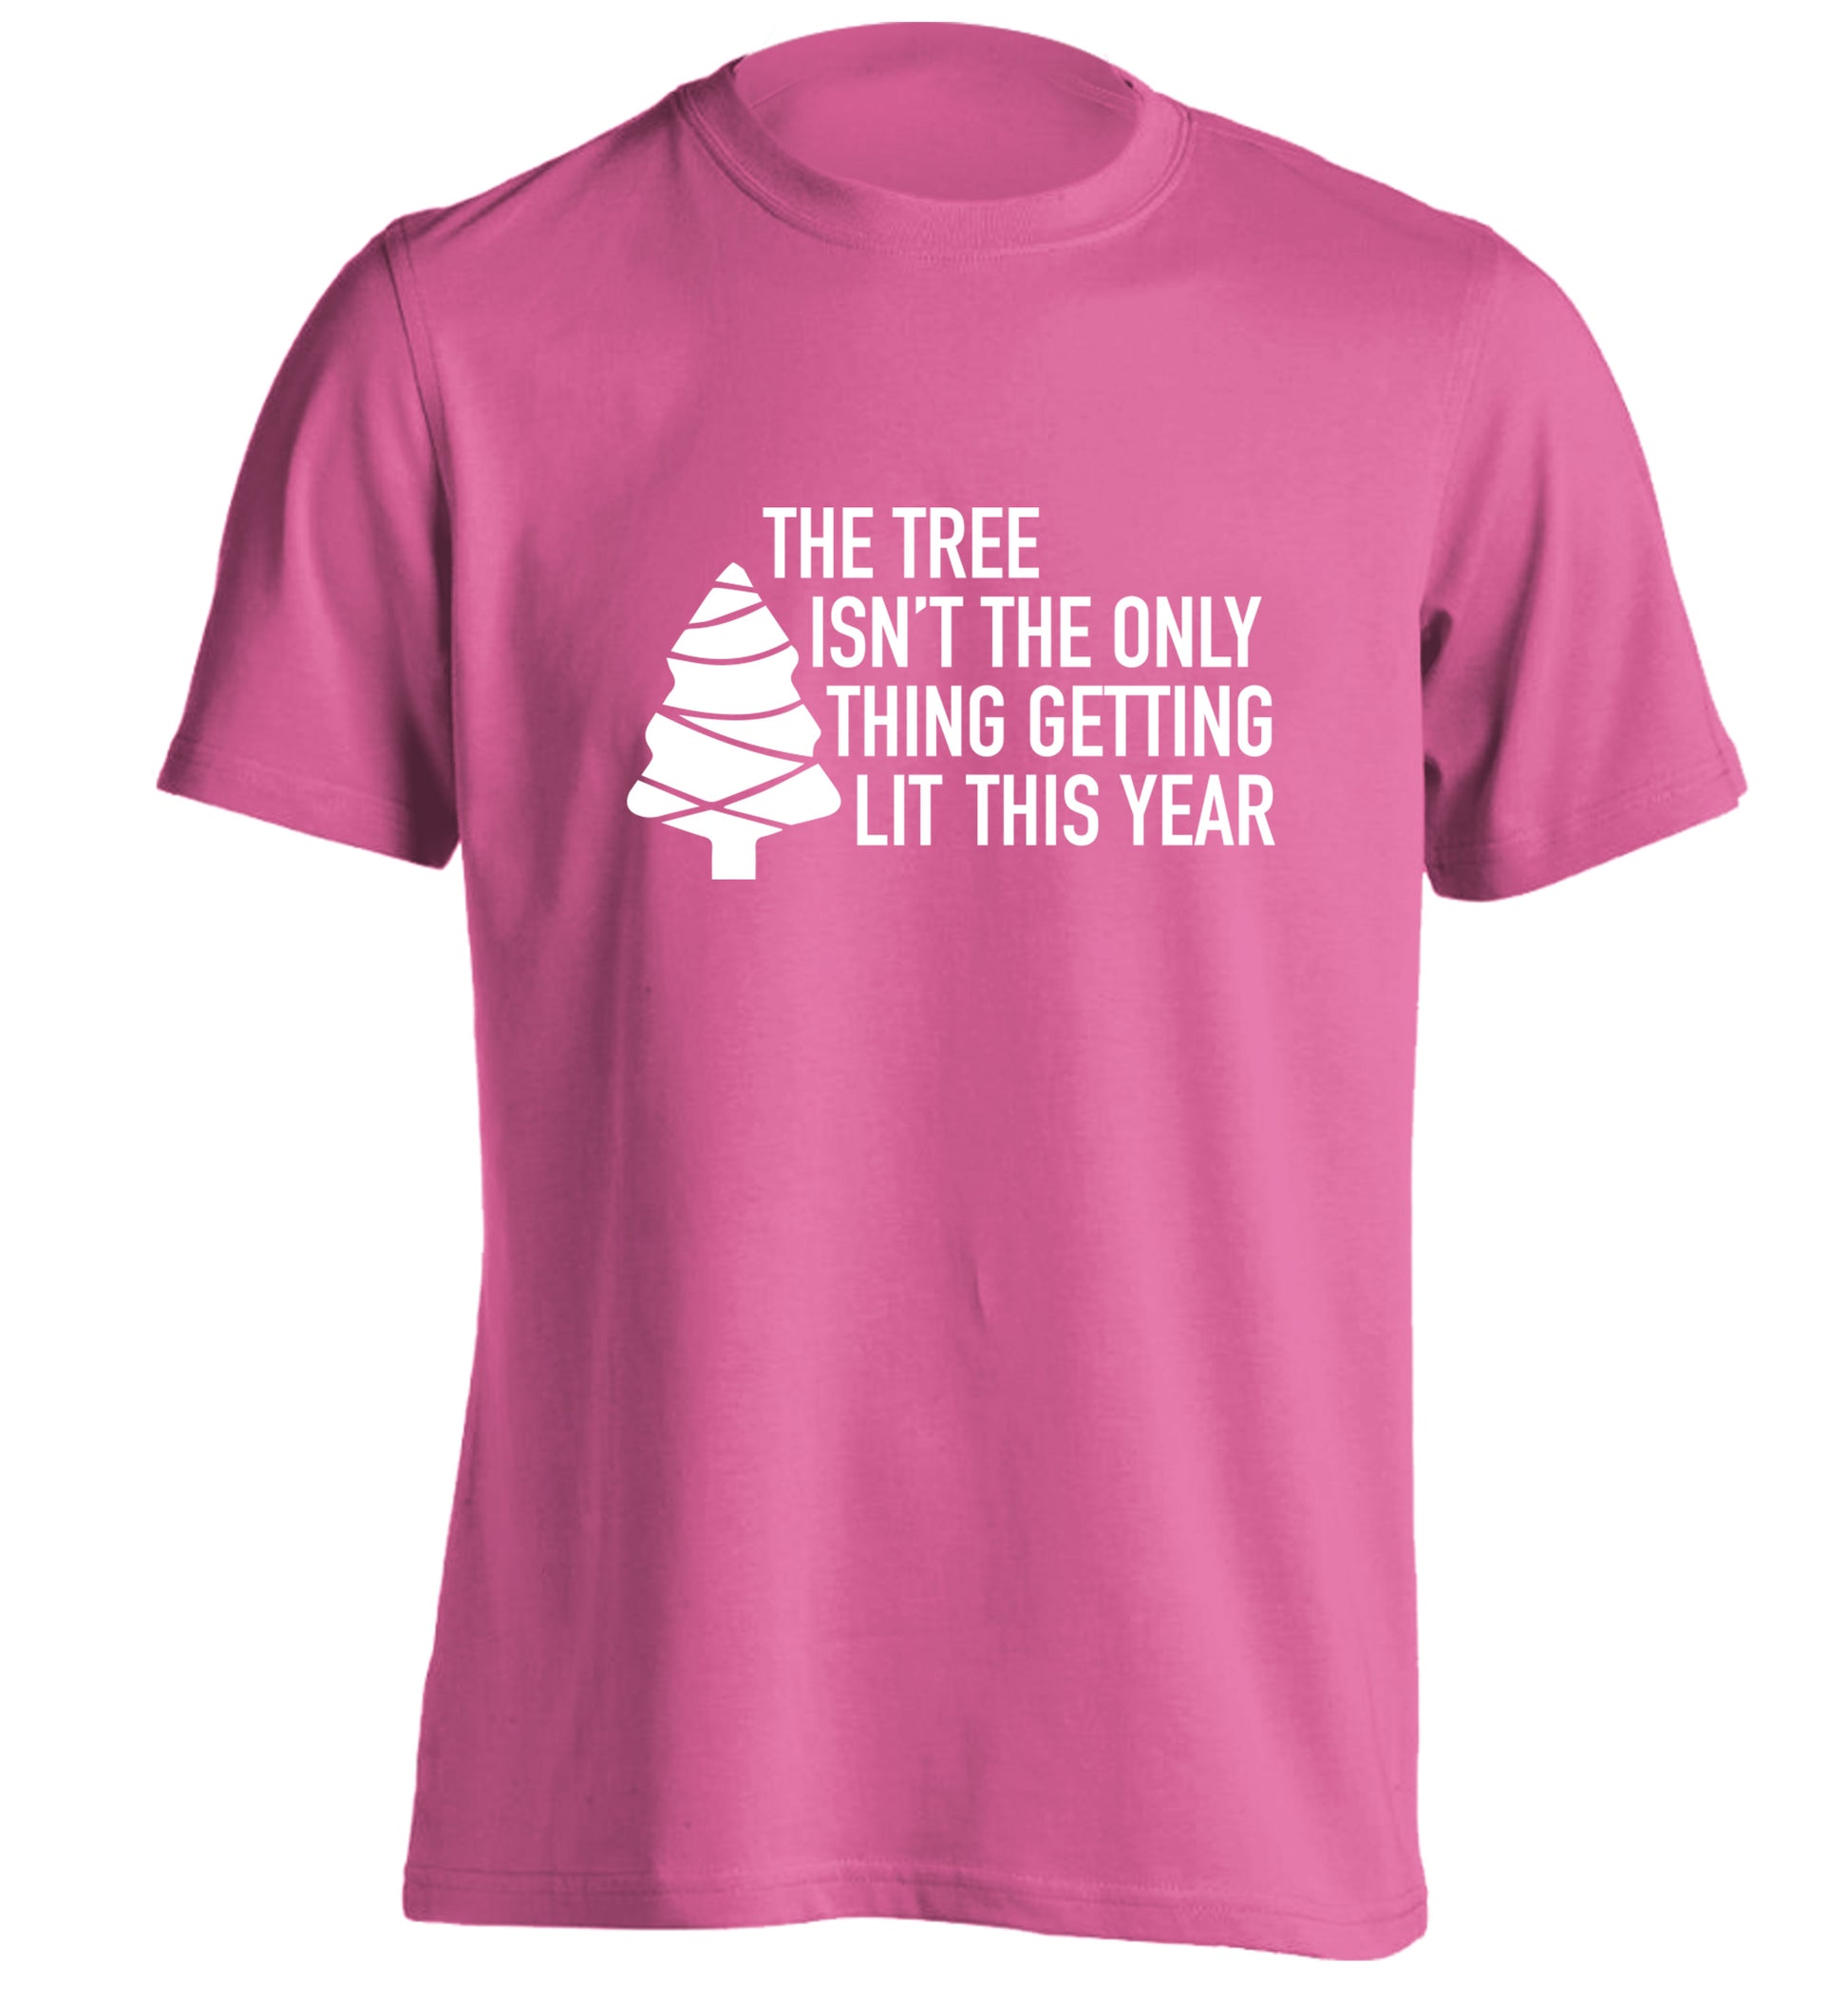 The tree isn't the only thing getting lit this year adults unisex pink Tshirt 2XL